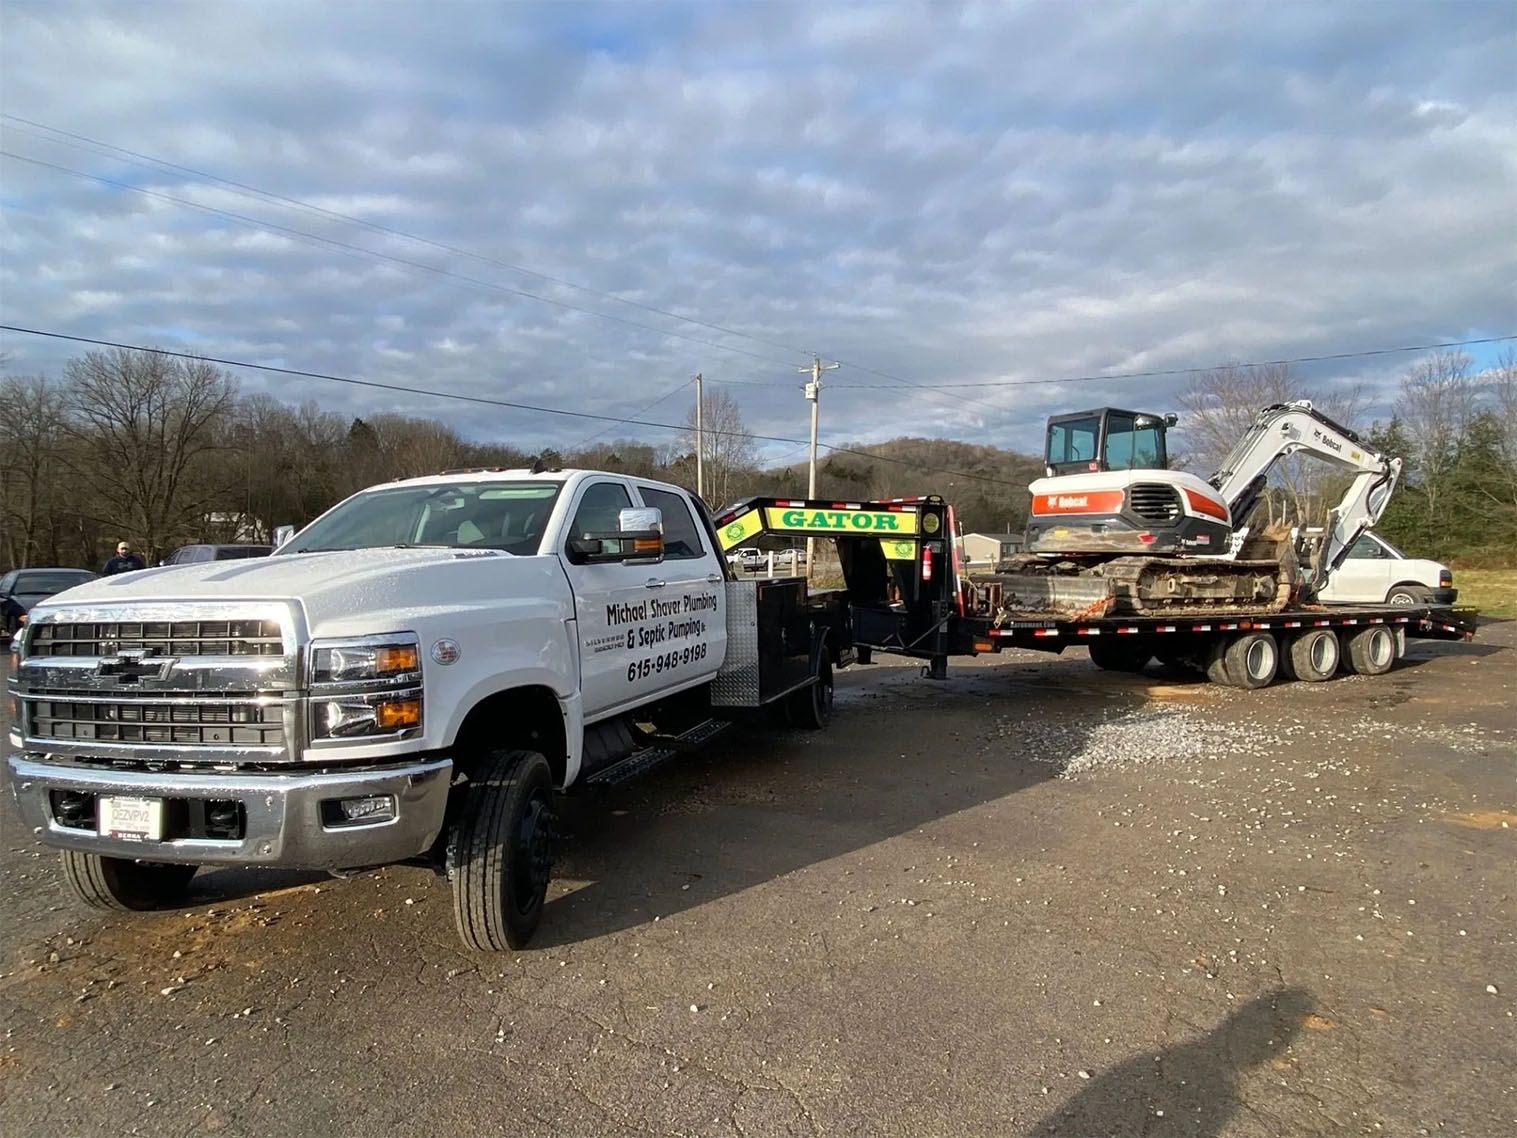 Company pick up truck in front of excavator — Bethpage, TN — Michael Shaver Plumbing & Septic Pumping